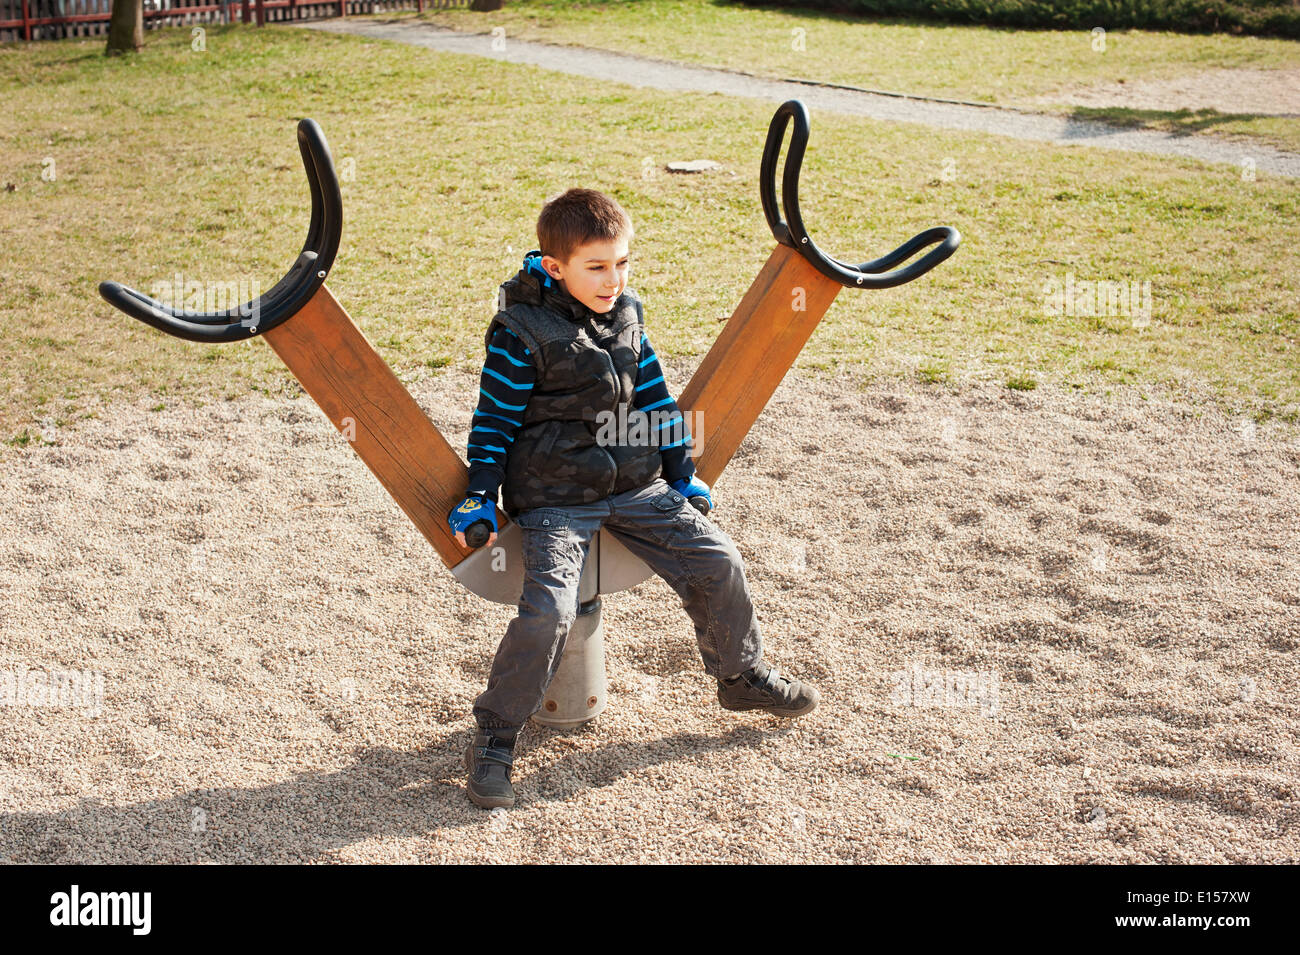 A boy playing in playground area Stock Photo